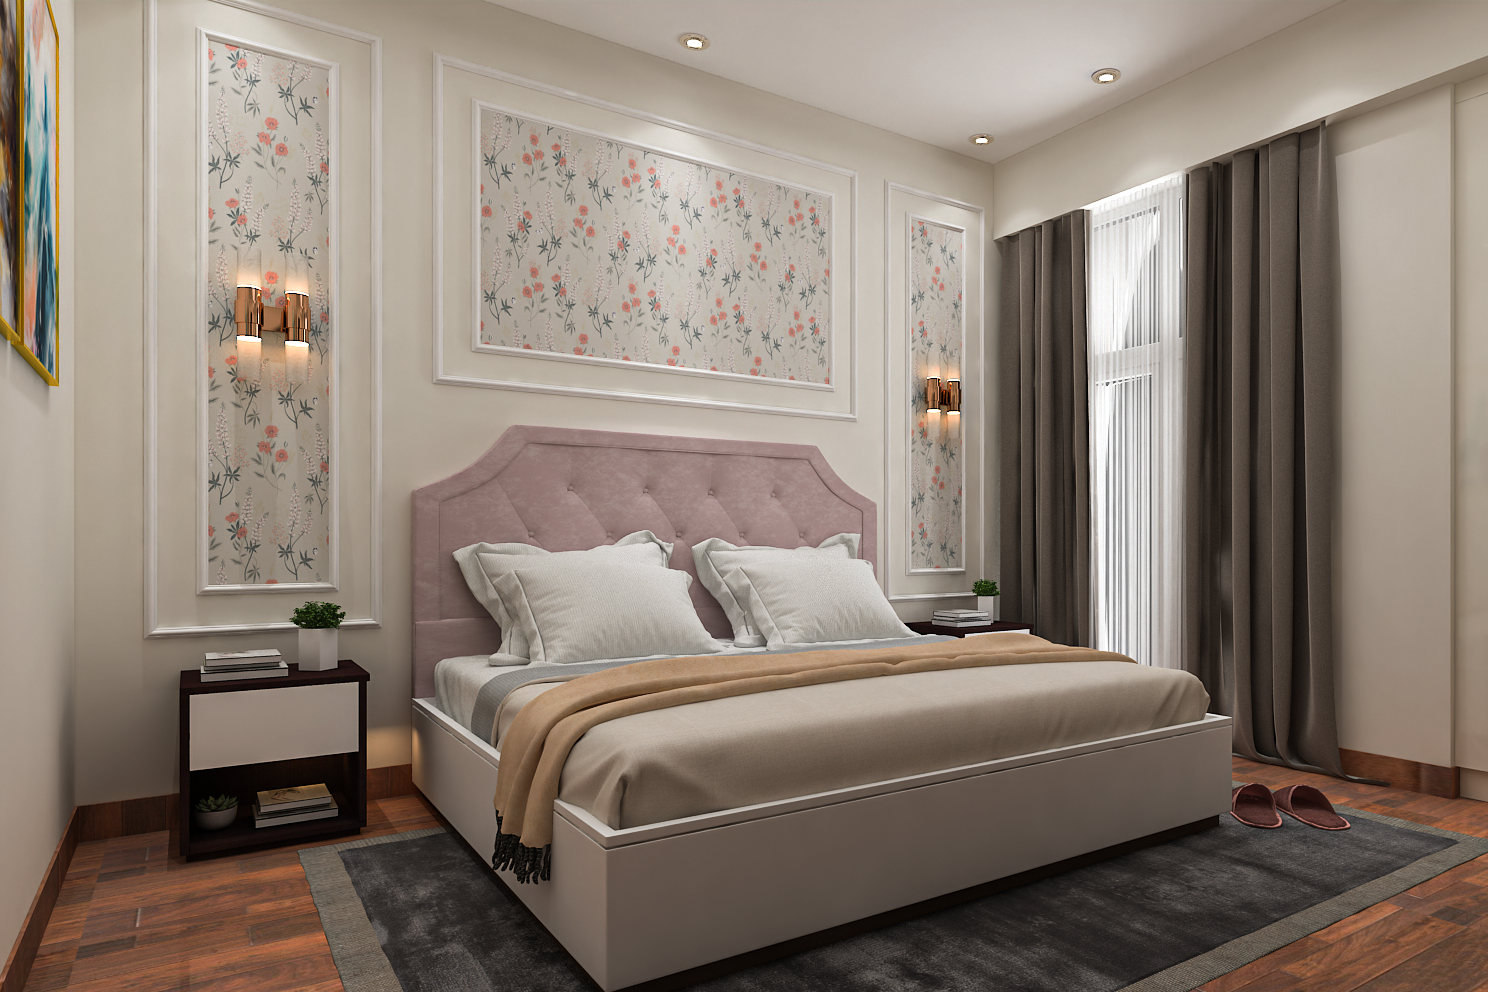 Classic Style Master Bedroom Design With Pink Headboard